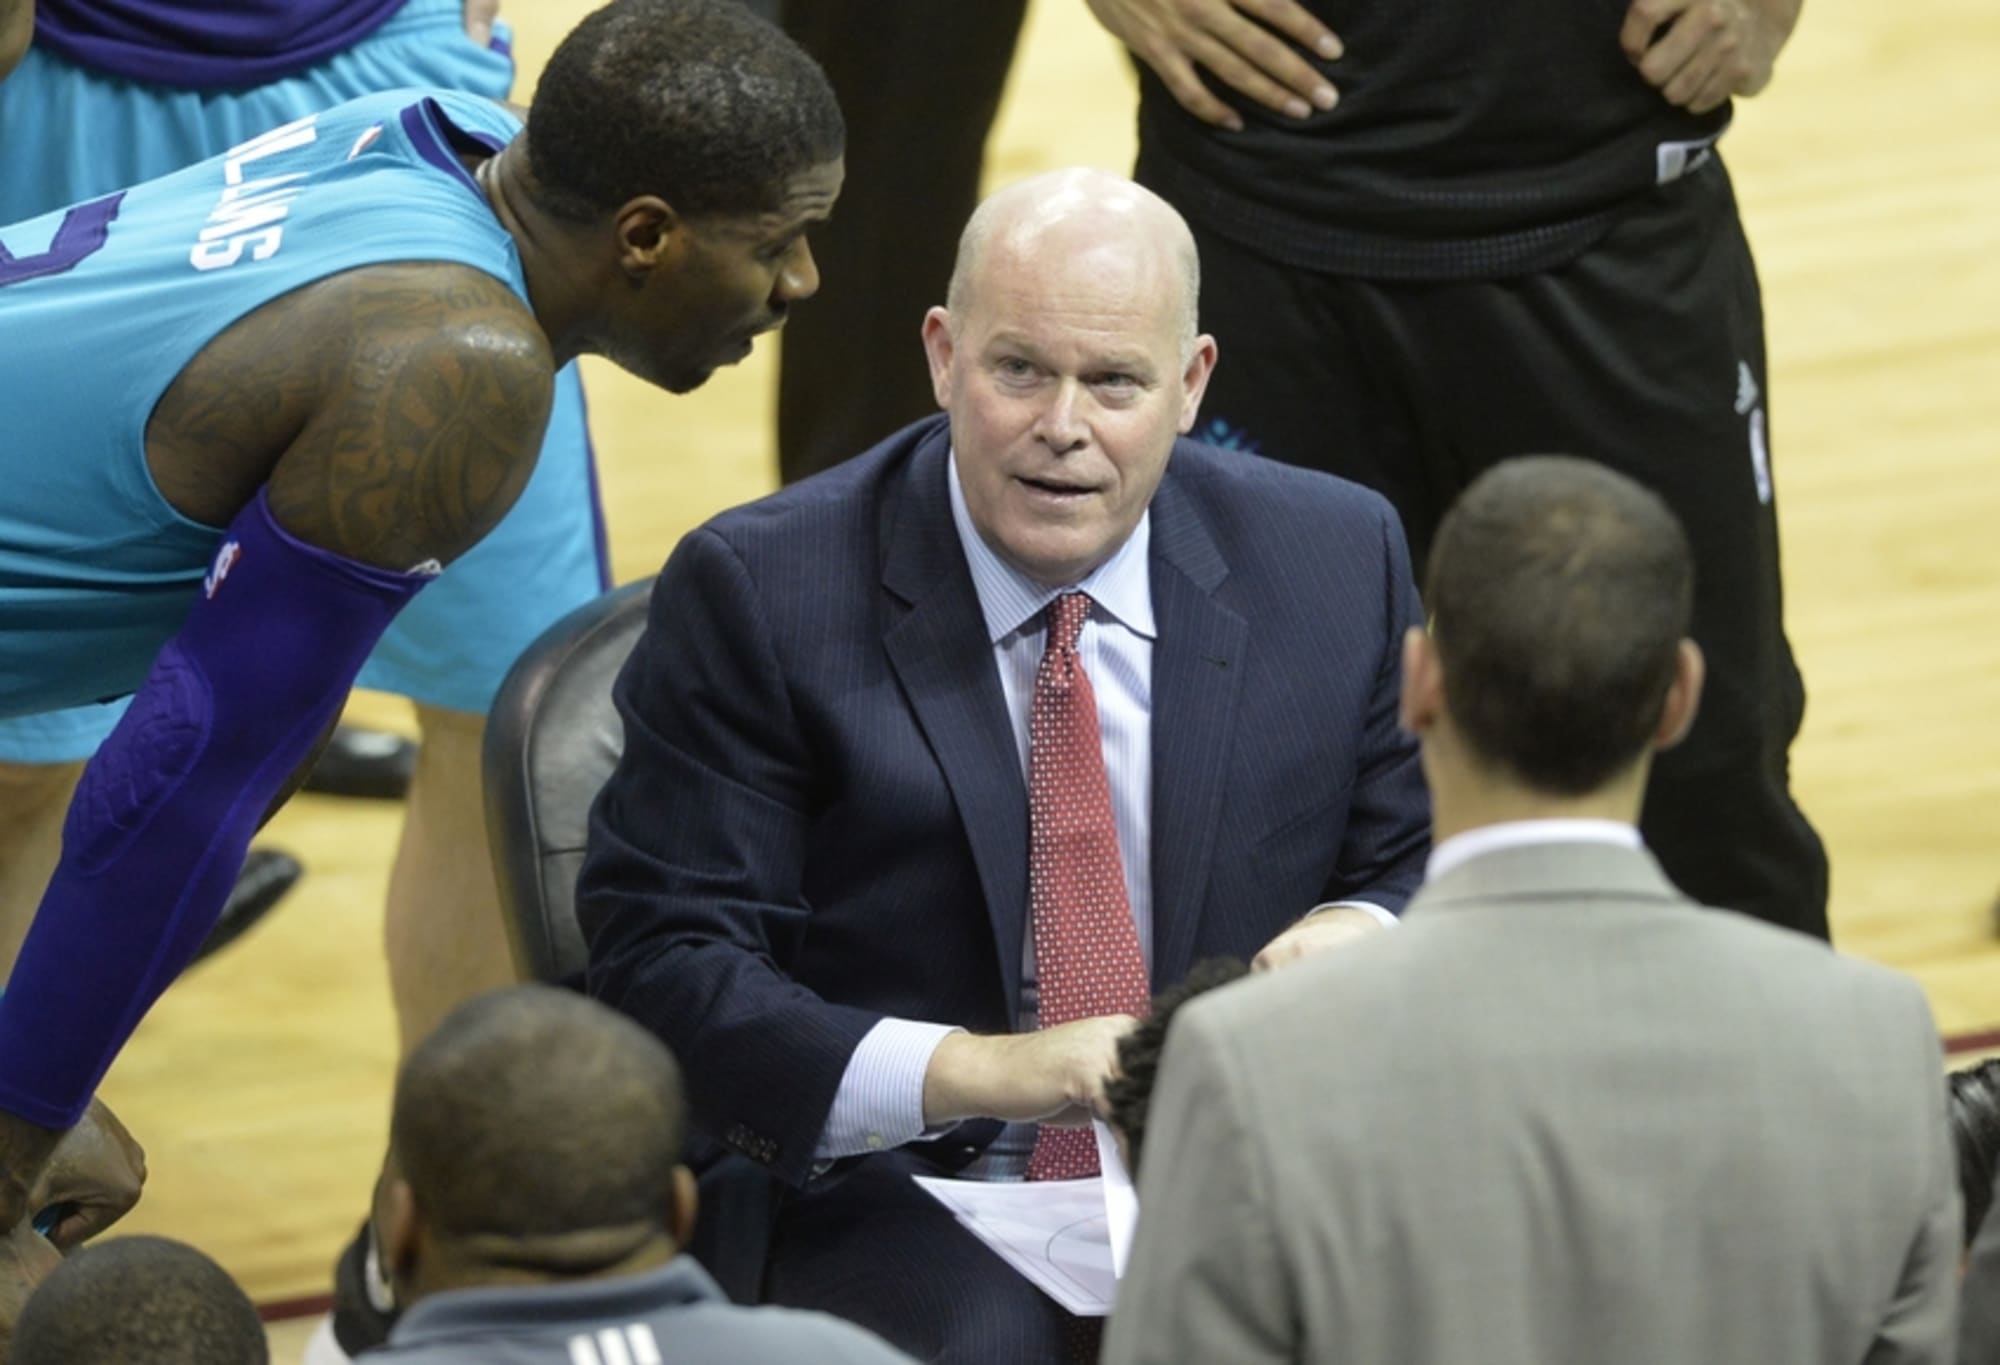 Charlotte Hornets: Steve Clifford For Coach of the Year?